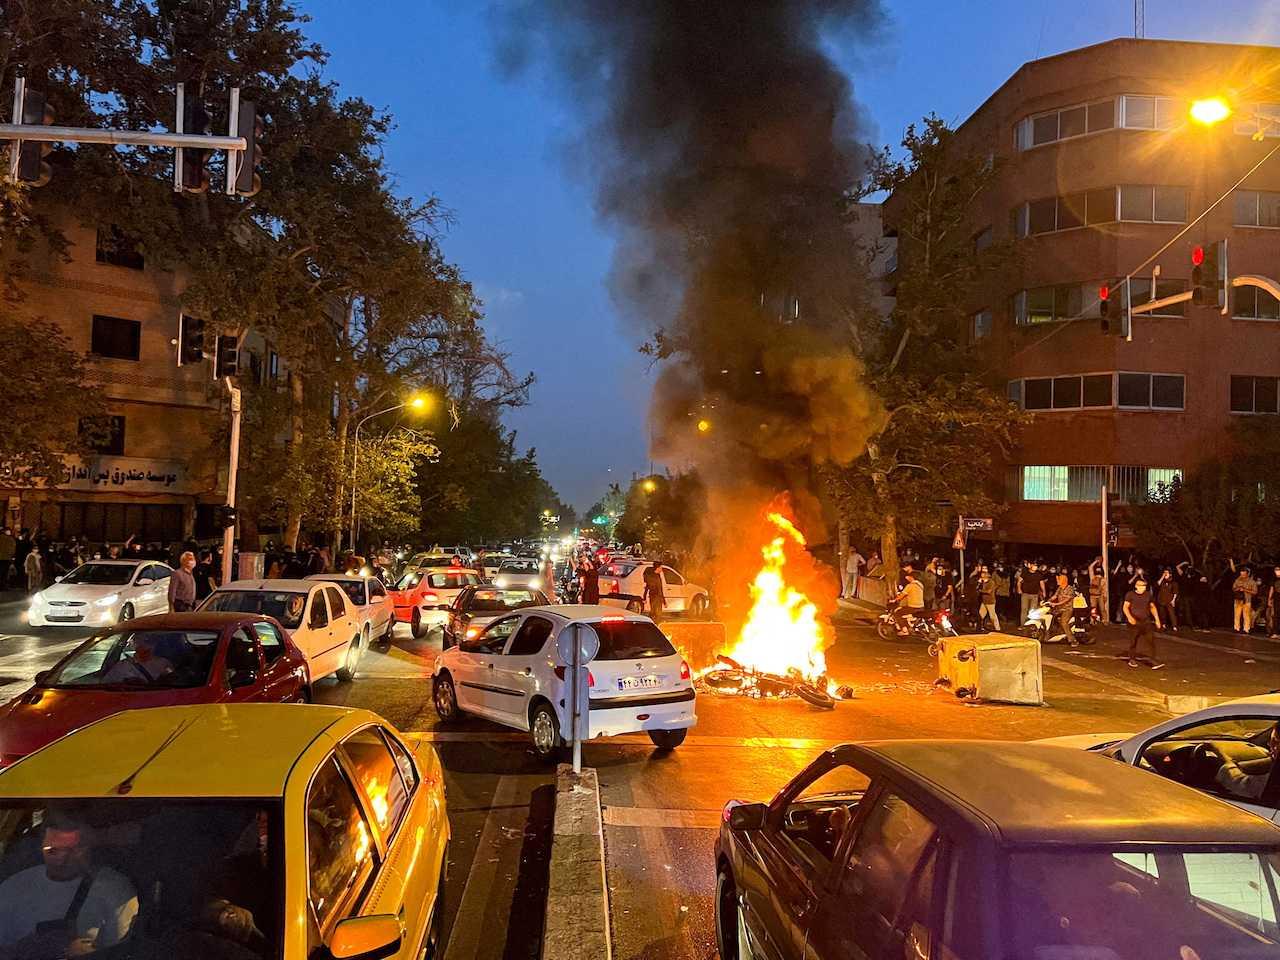 A police motorcycle burns during a protest over the death of Mahsa Amini, a woman who died after being arrested by the Islamic republic's 'morality police', in Tehran, Iran Sept 19. Photo: Reuters